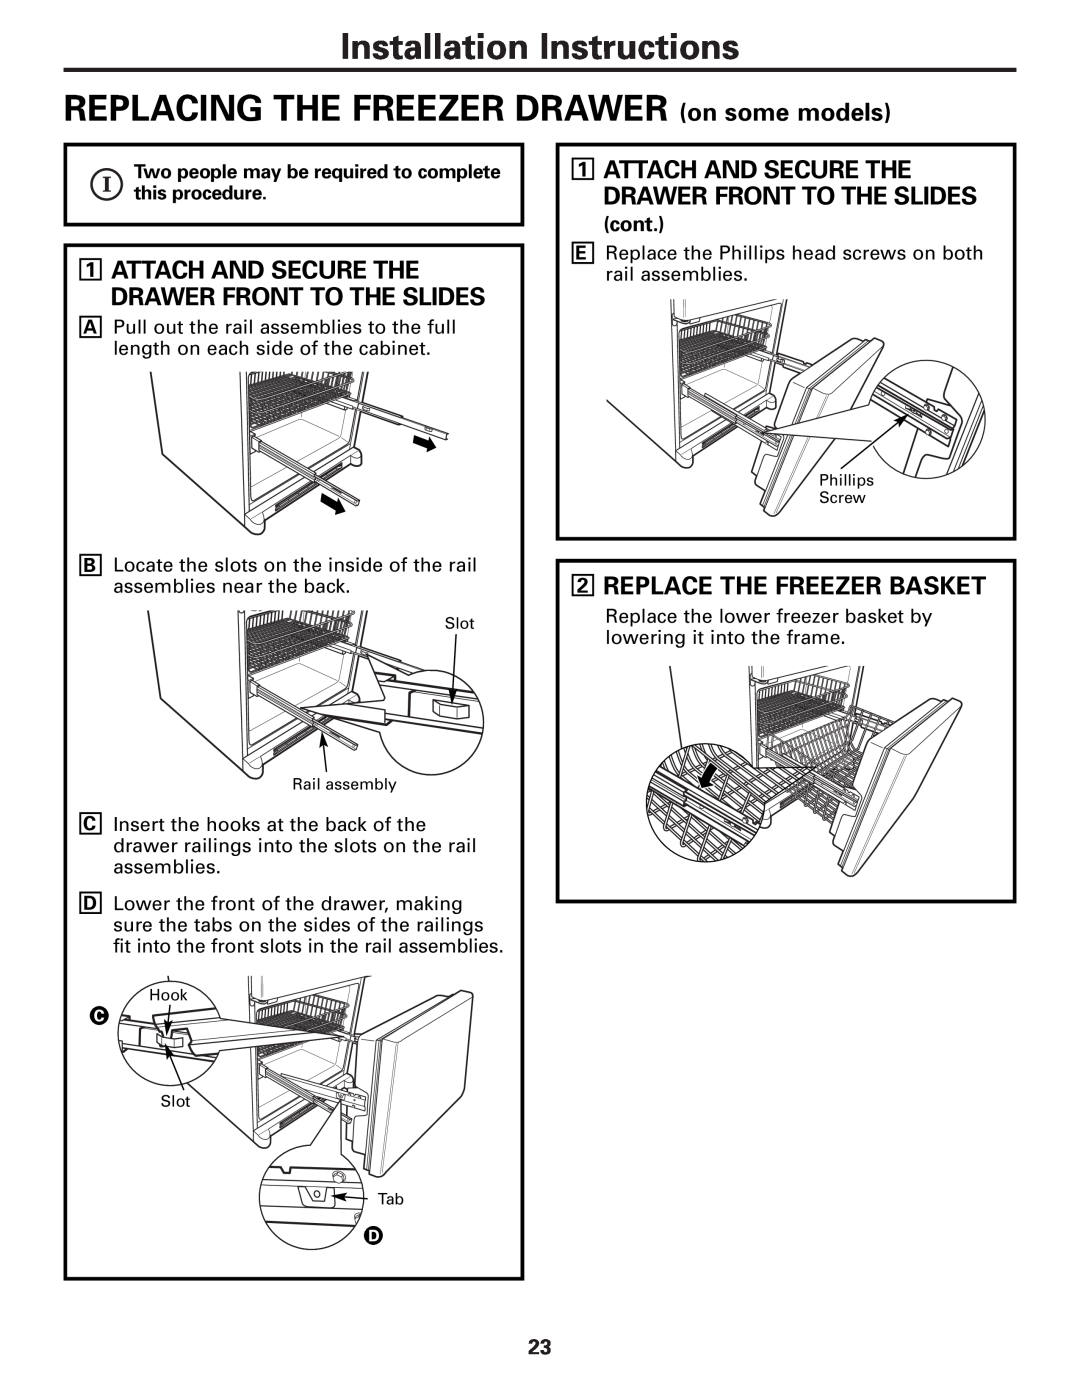 GE GDL22KCWSS Installation Instructions REPLACING THE FREEZER DRAWER on some models, Replace The Freezer Basket, cont 